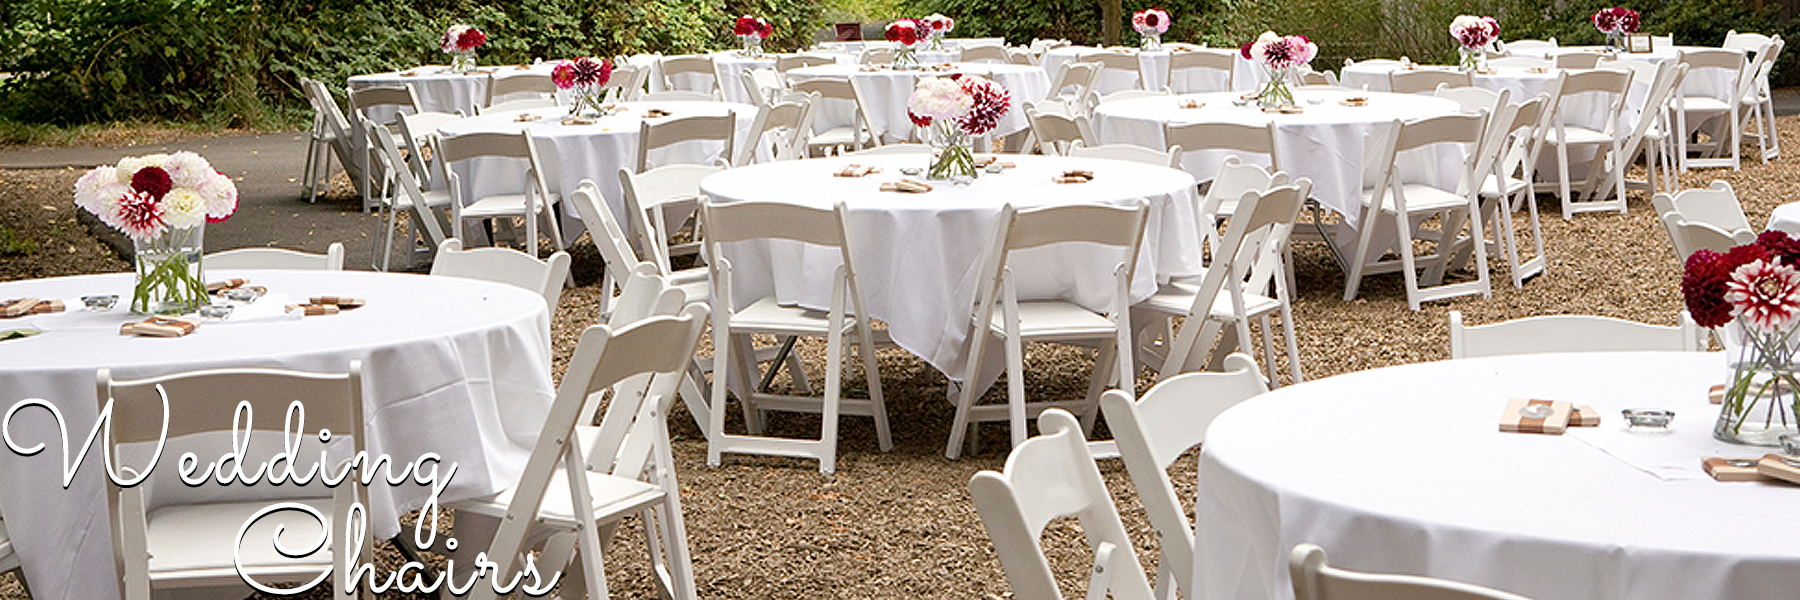 Affordable Wedding Chairs